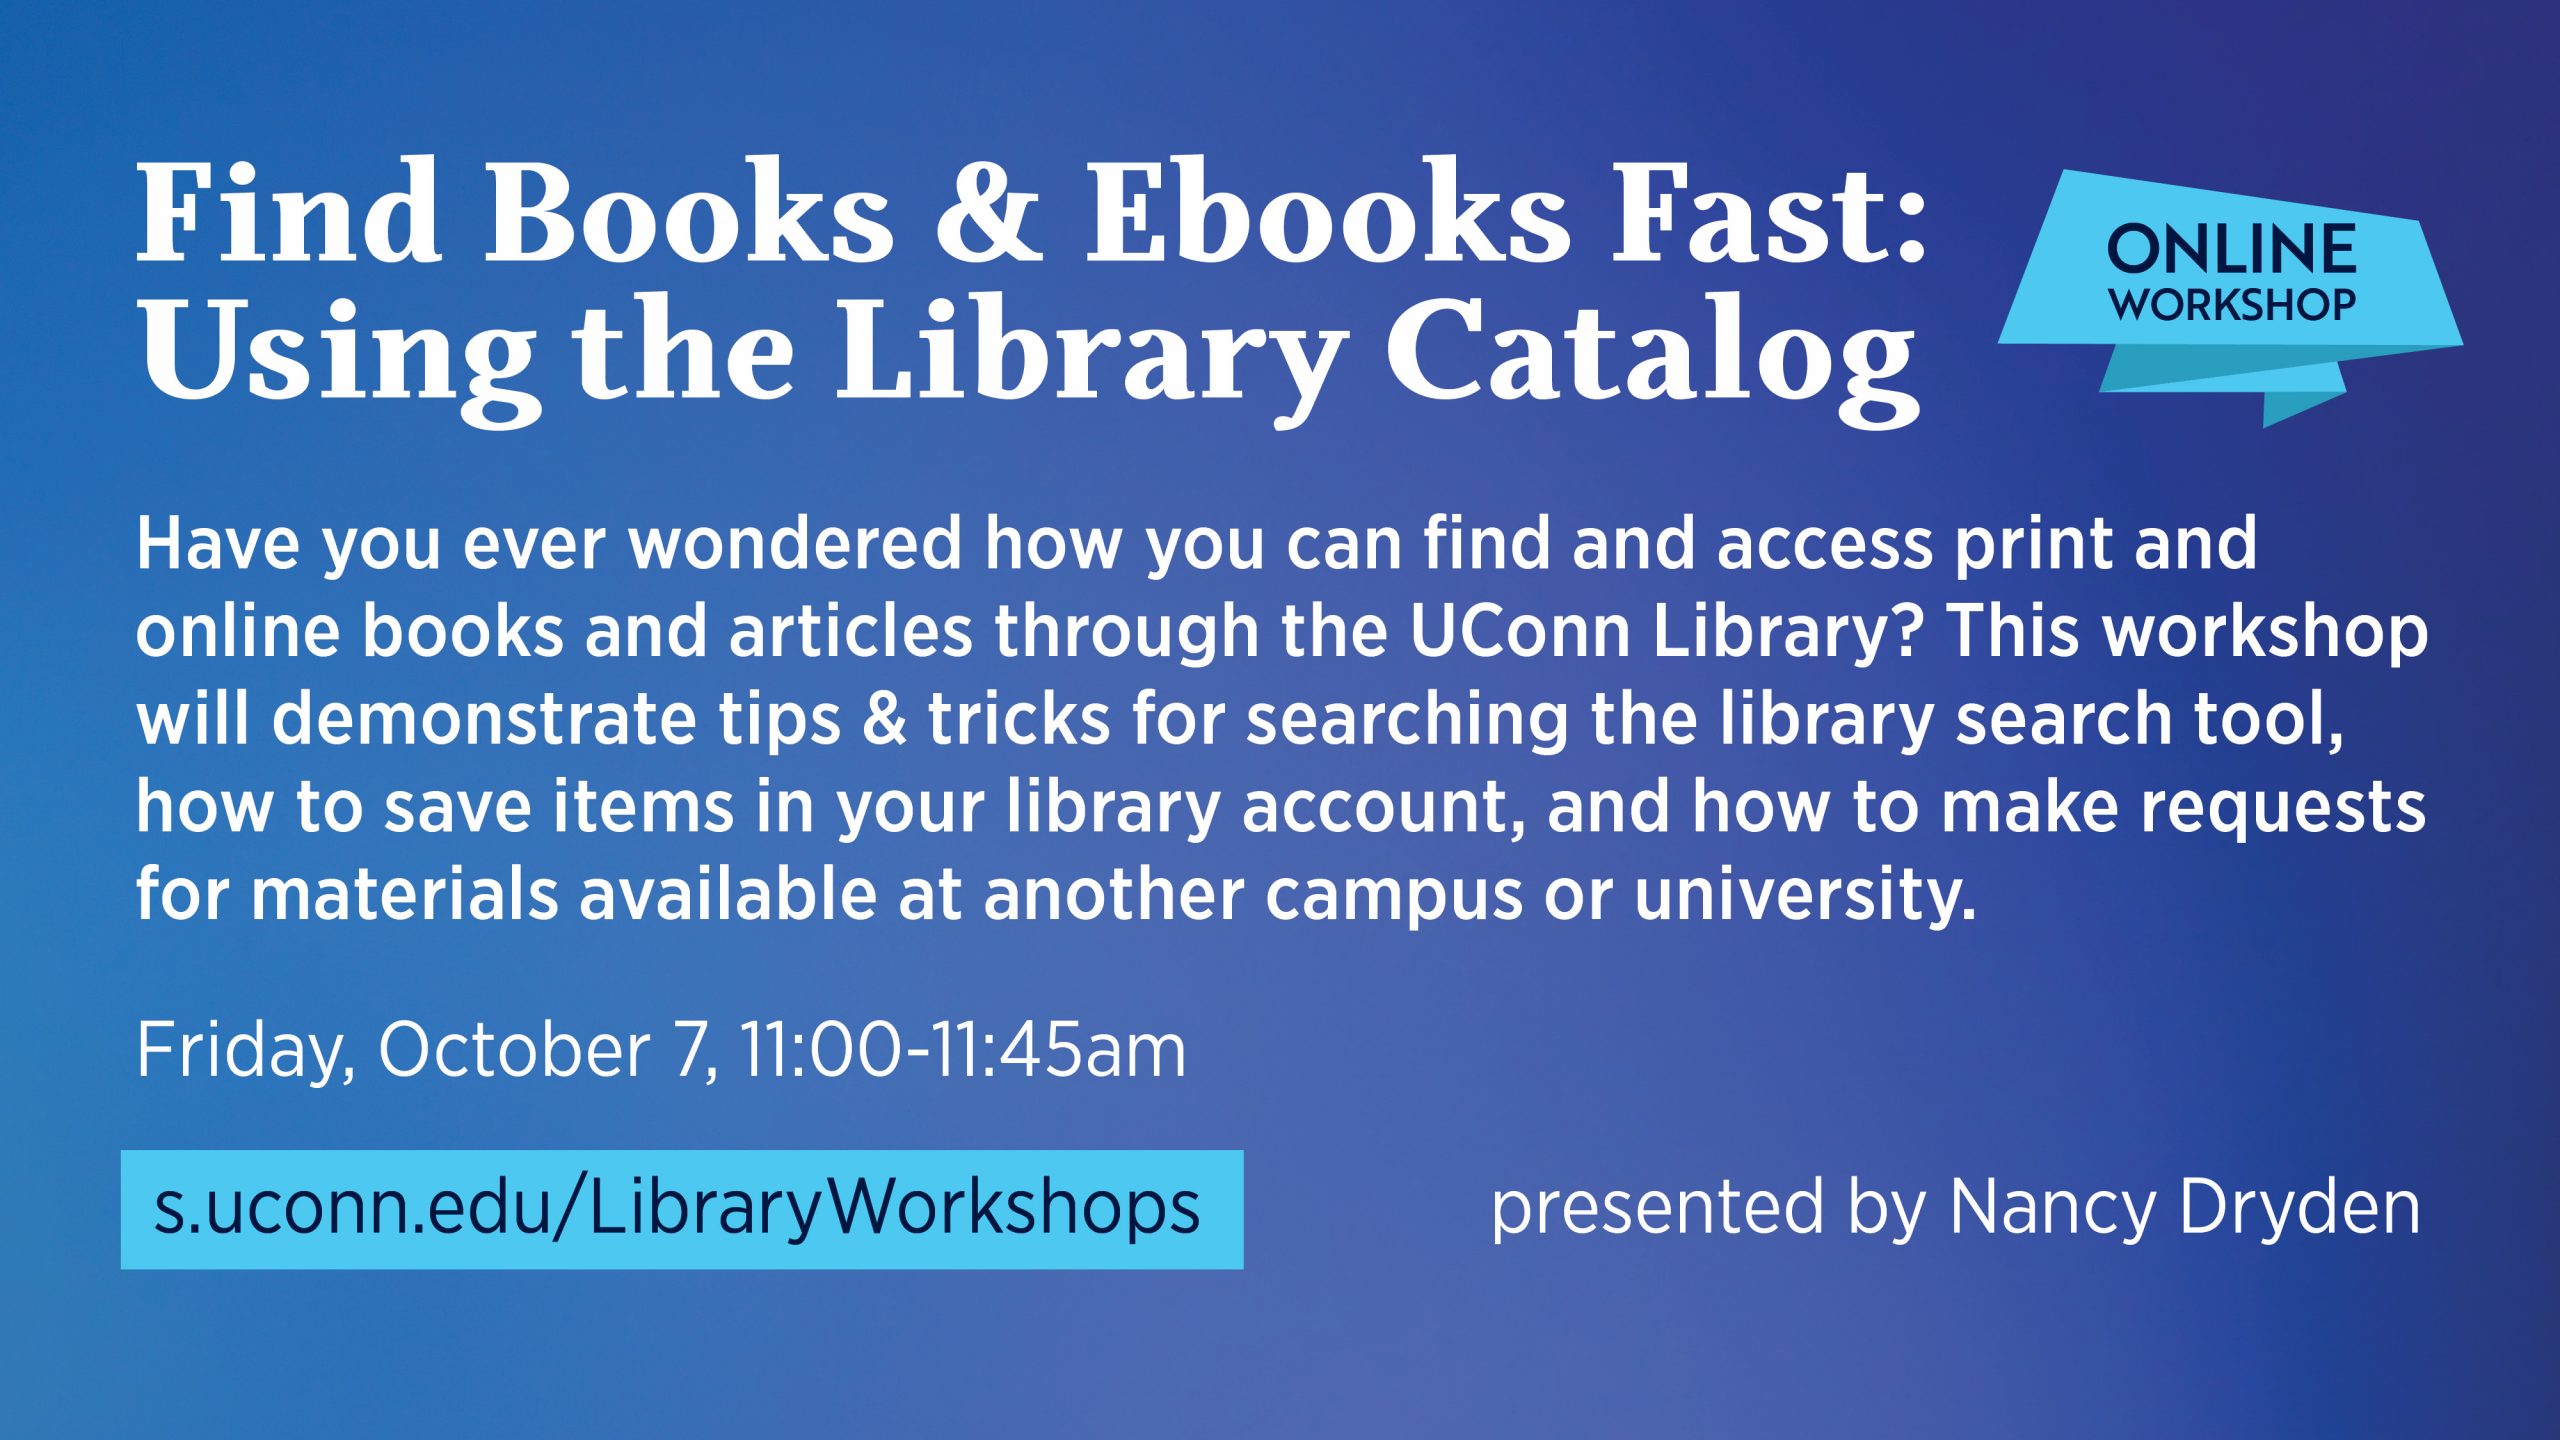 Marketing image with dark blue background, light blue pops of color and white text. The text reads: Find Books & ebooks Fast: Using the Library Catalog Have you ever wondered how you can find and access print and online books and articles through the UConn Library? This workshop will demonstrate tips & tricks for searching the library search tool, how to save items in your library account, and how to make requests for materials available at another campus or university. Friday, October 7 11:00-11:45am Online. Presented by Nancy Dryden